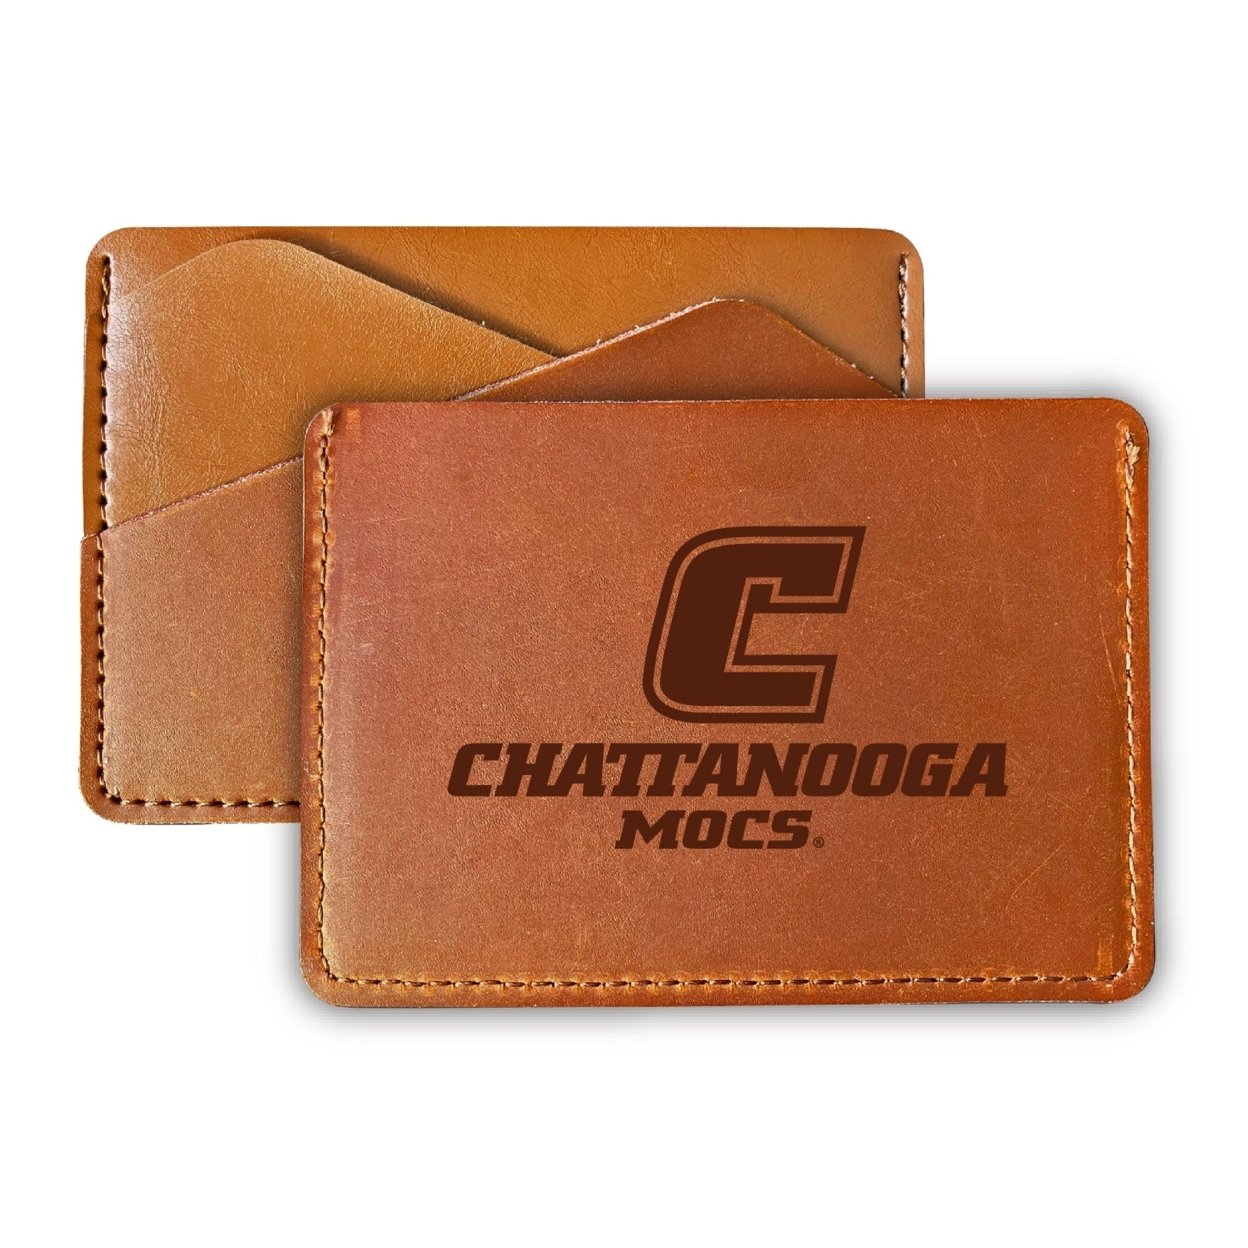 University Of Tennessee At Chattanooga College Leather Card Holder Wallet